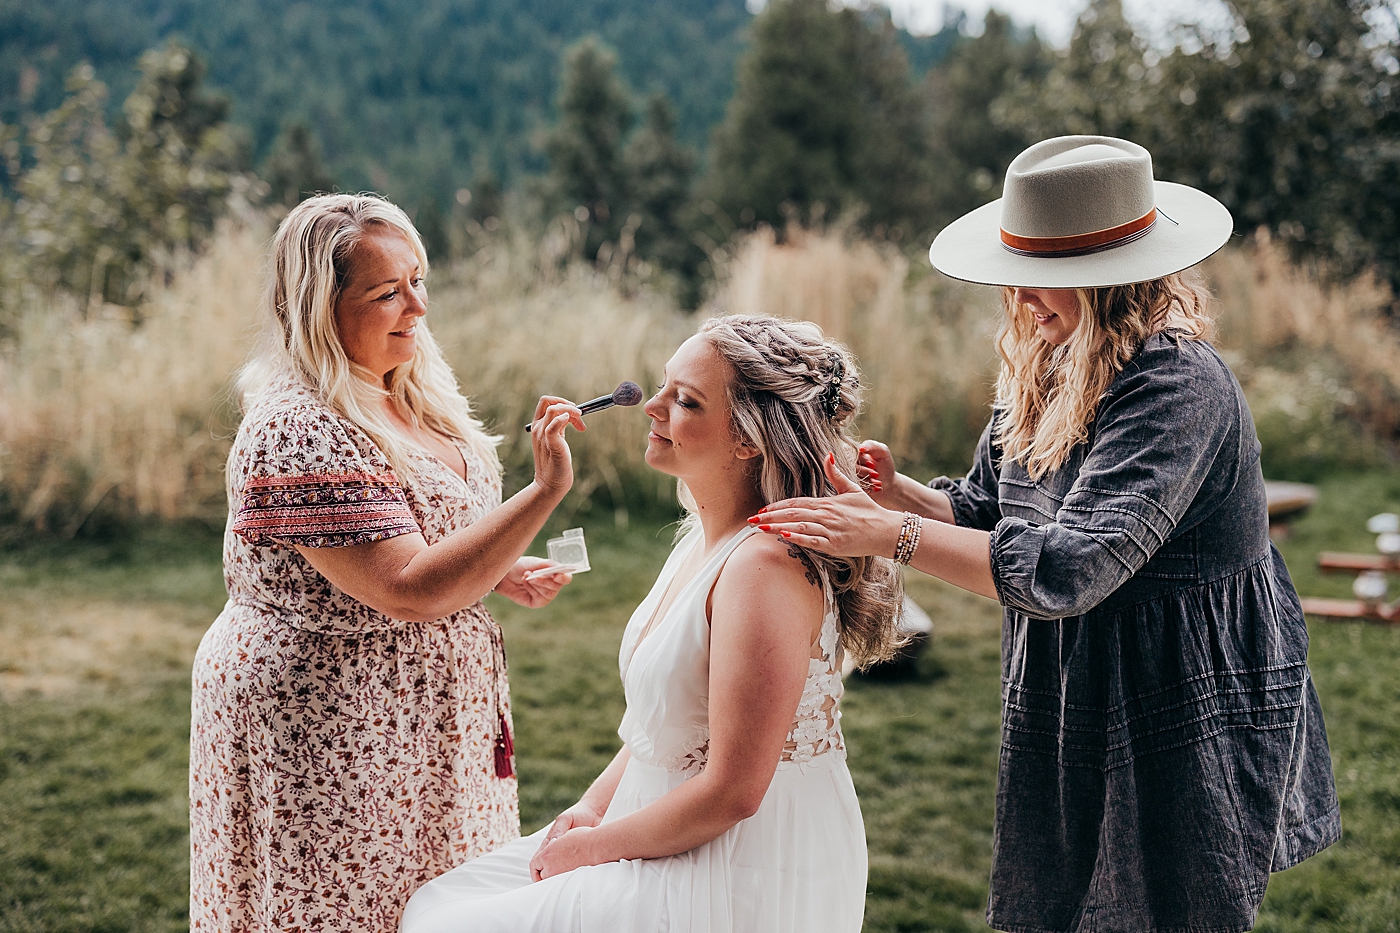 Hair and makeup for elopement. Photo by Megan Montalvo Photography.